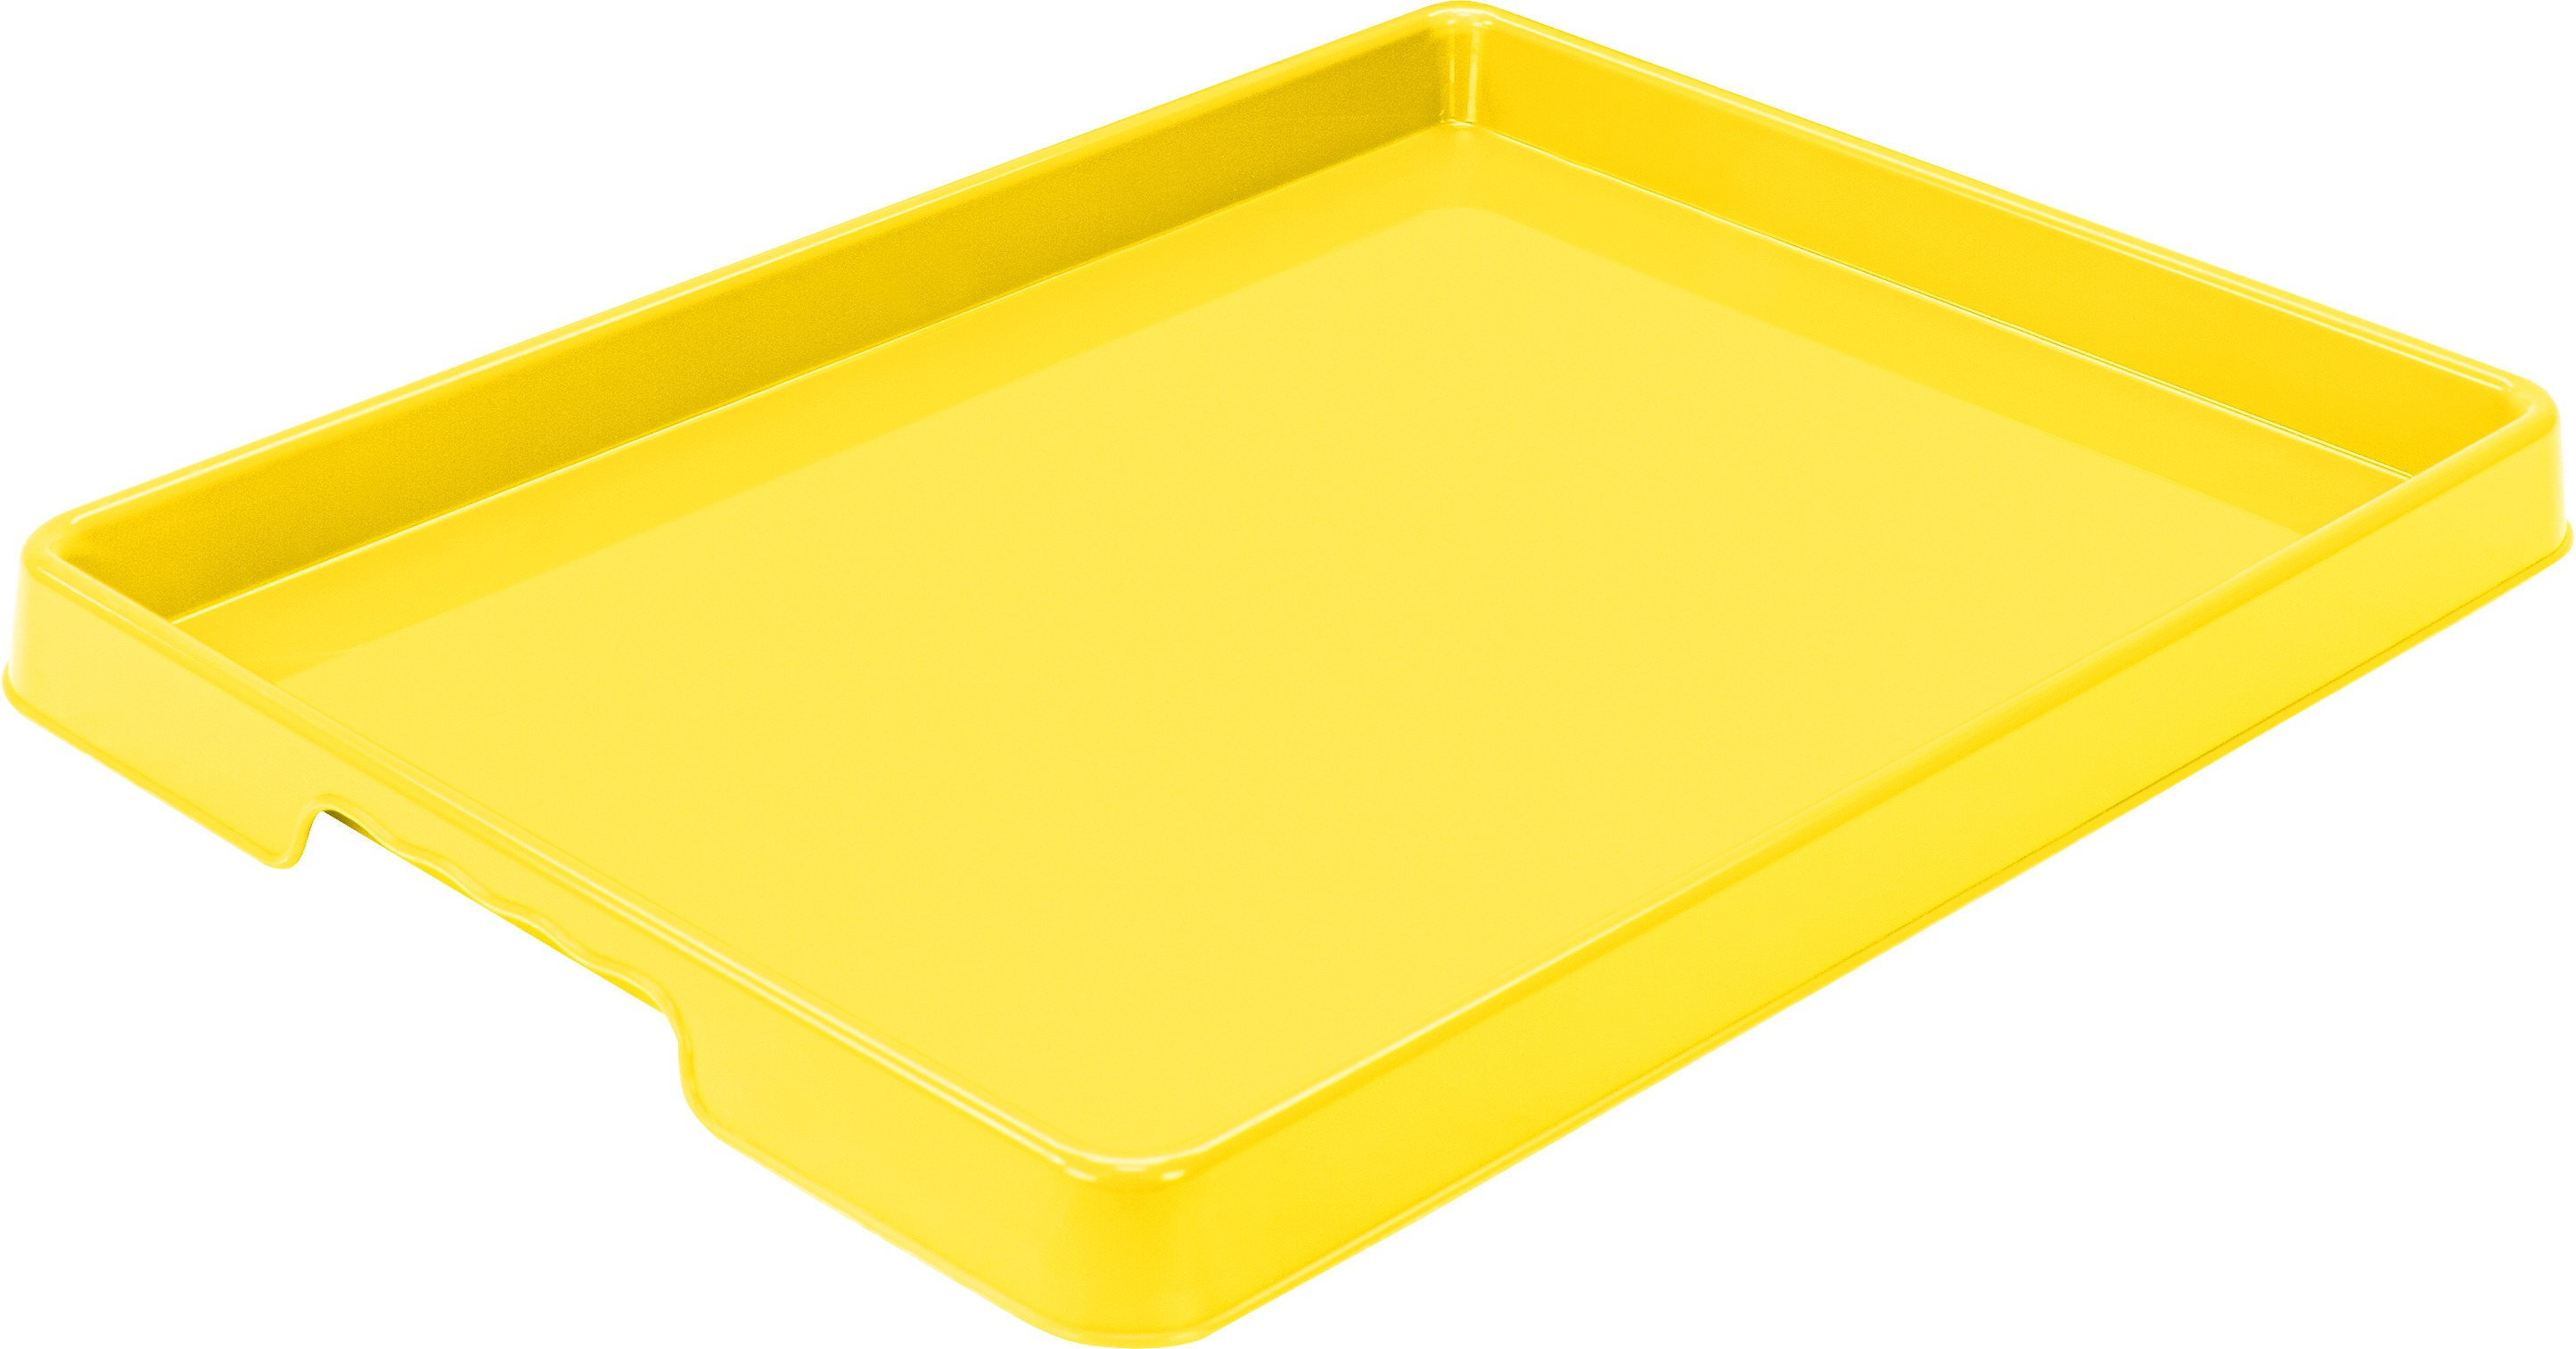 Storex Plastic Craft and Hobby Tray, 12 x 16 in, Yellow, 12-Pack 